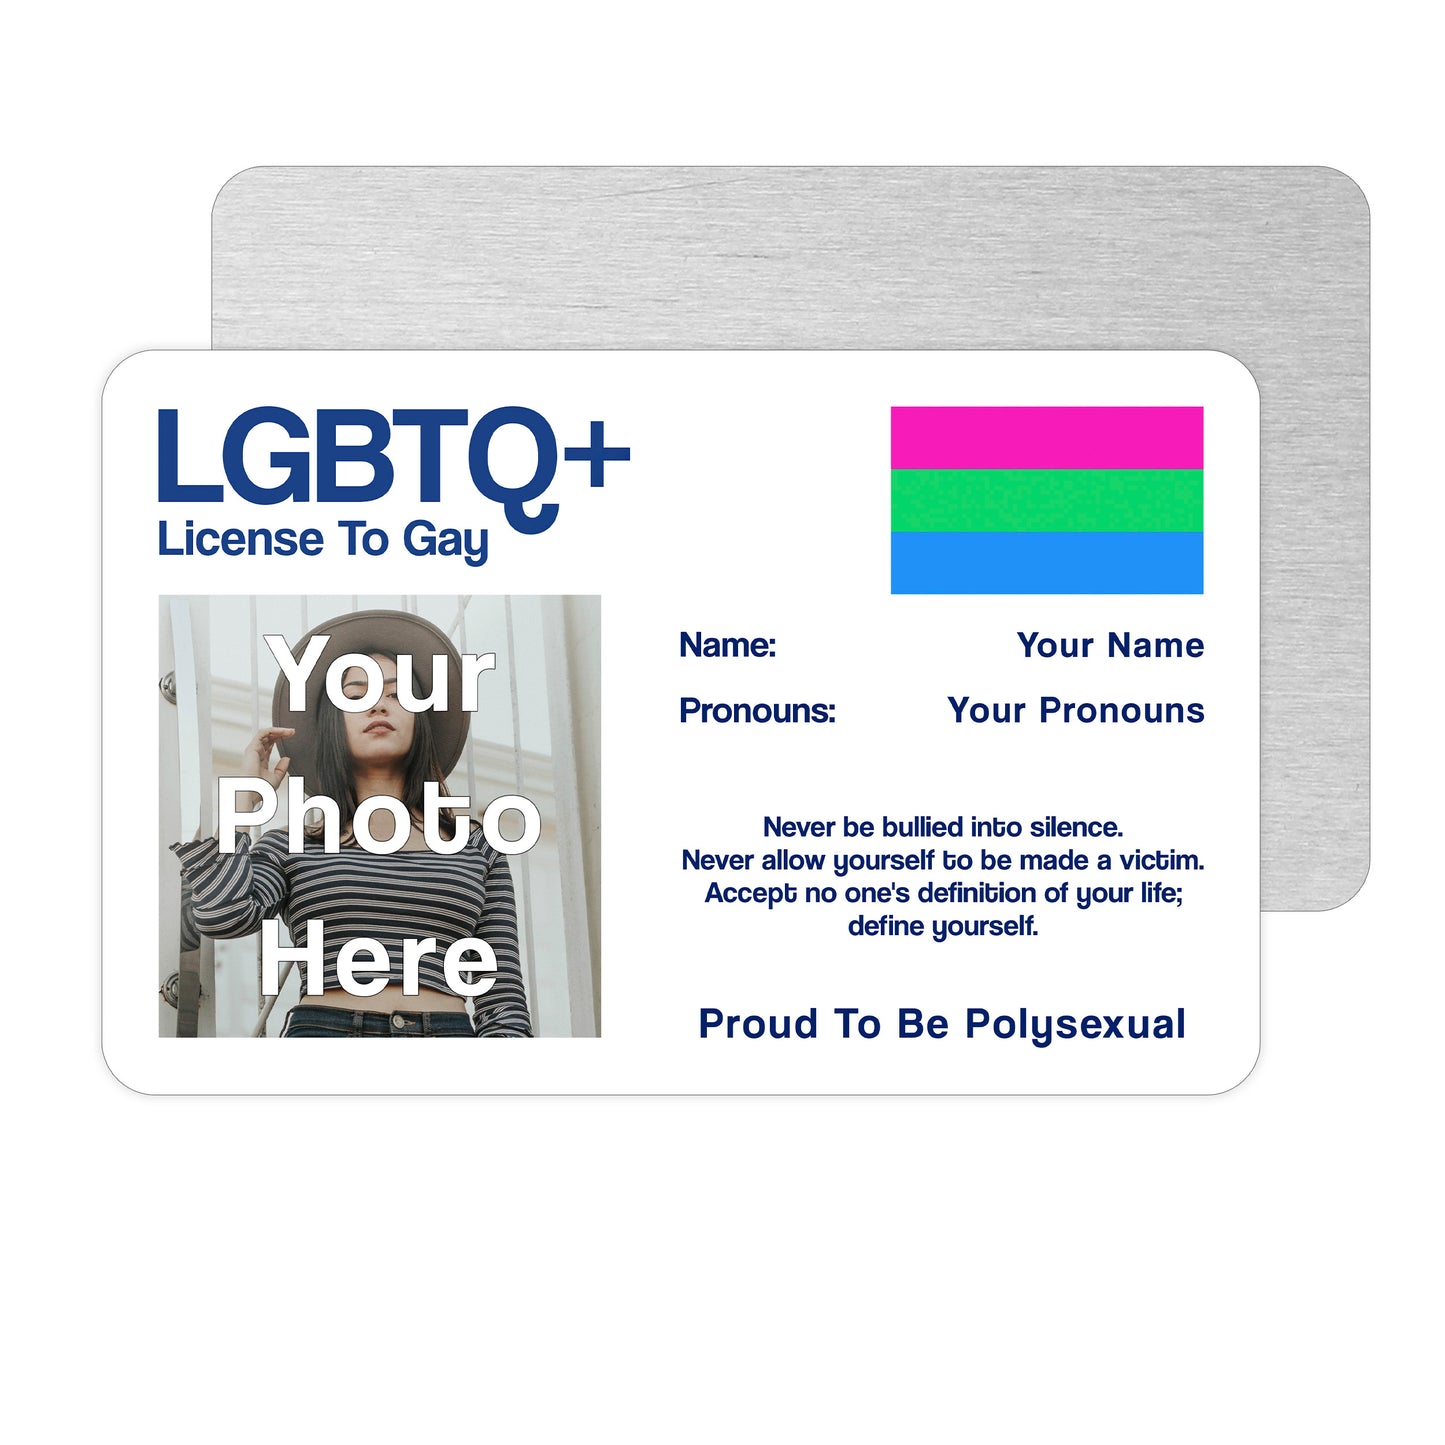 Polysexual license to gay aluminium wallet card personalised with your name, pronouns, and photo